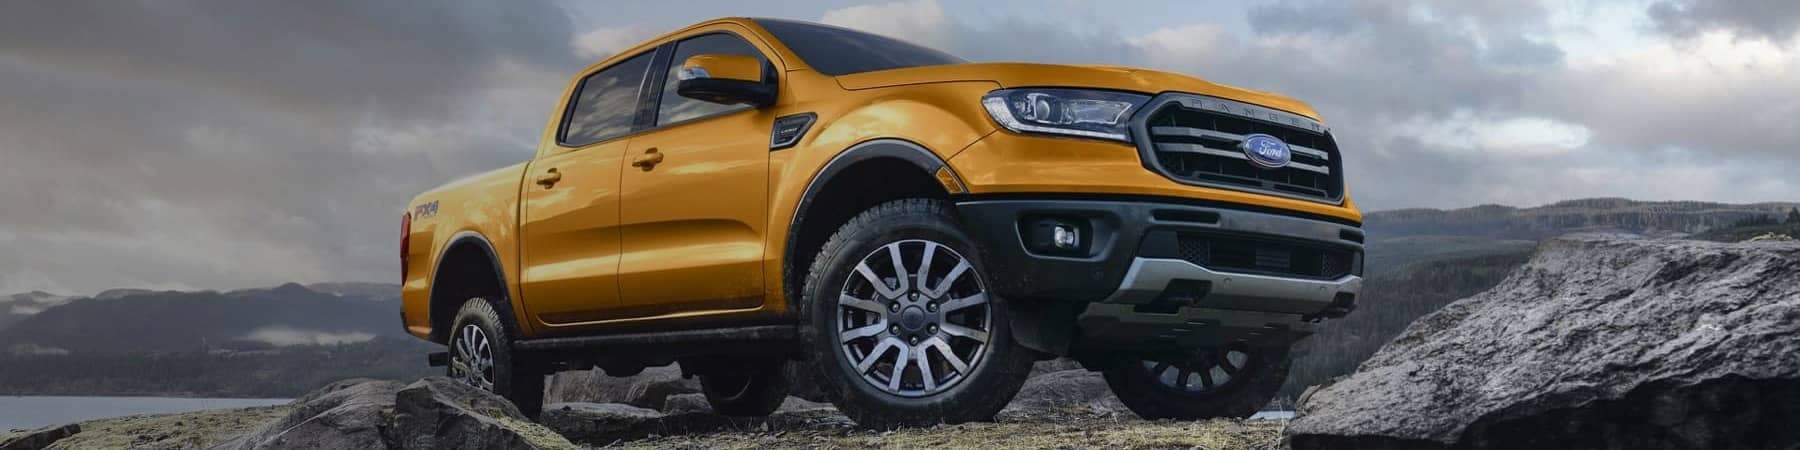 2021 Ford Ranger in Saber on rocky terrain with a body of water in background